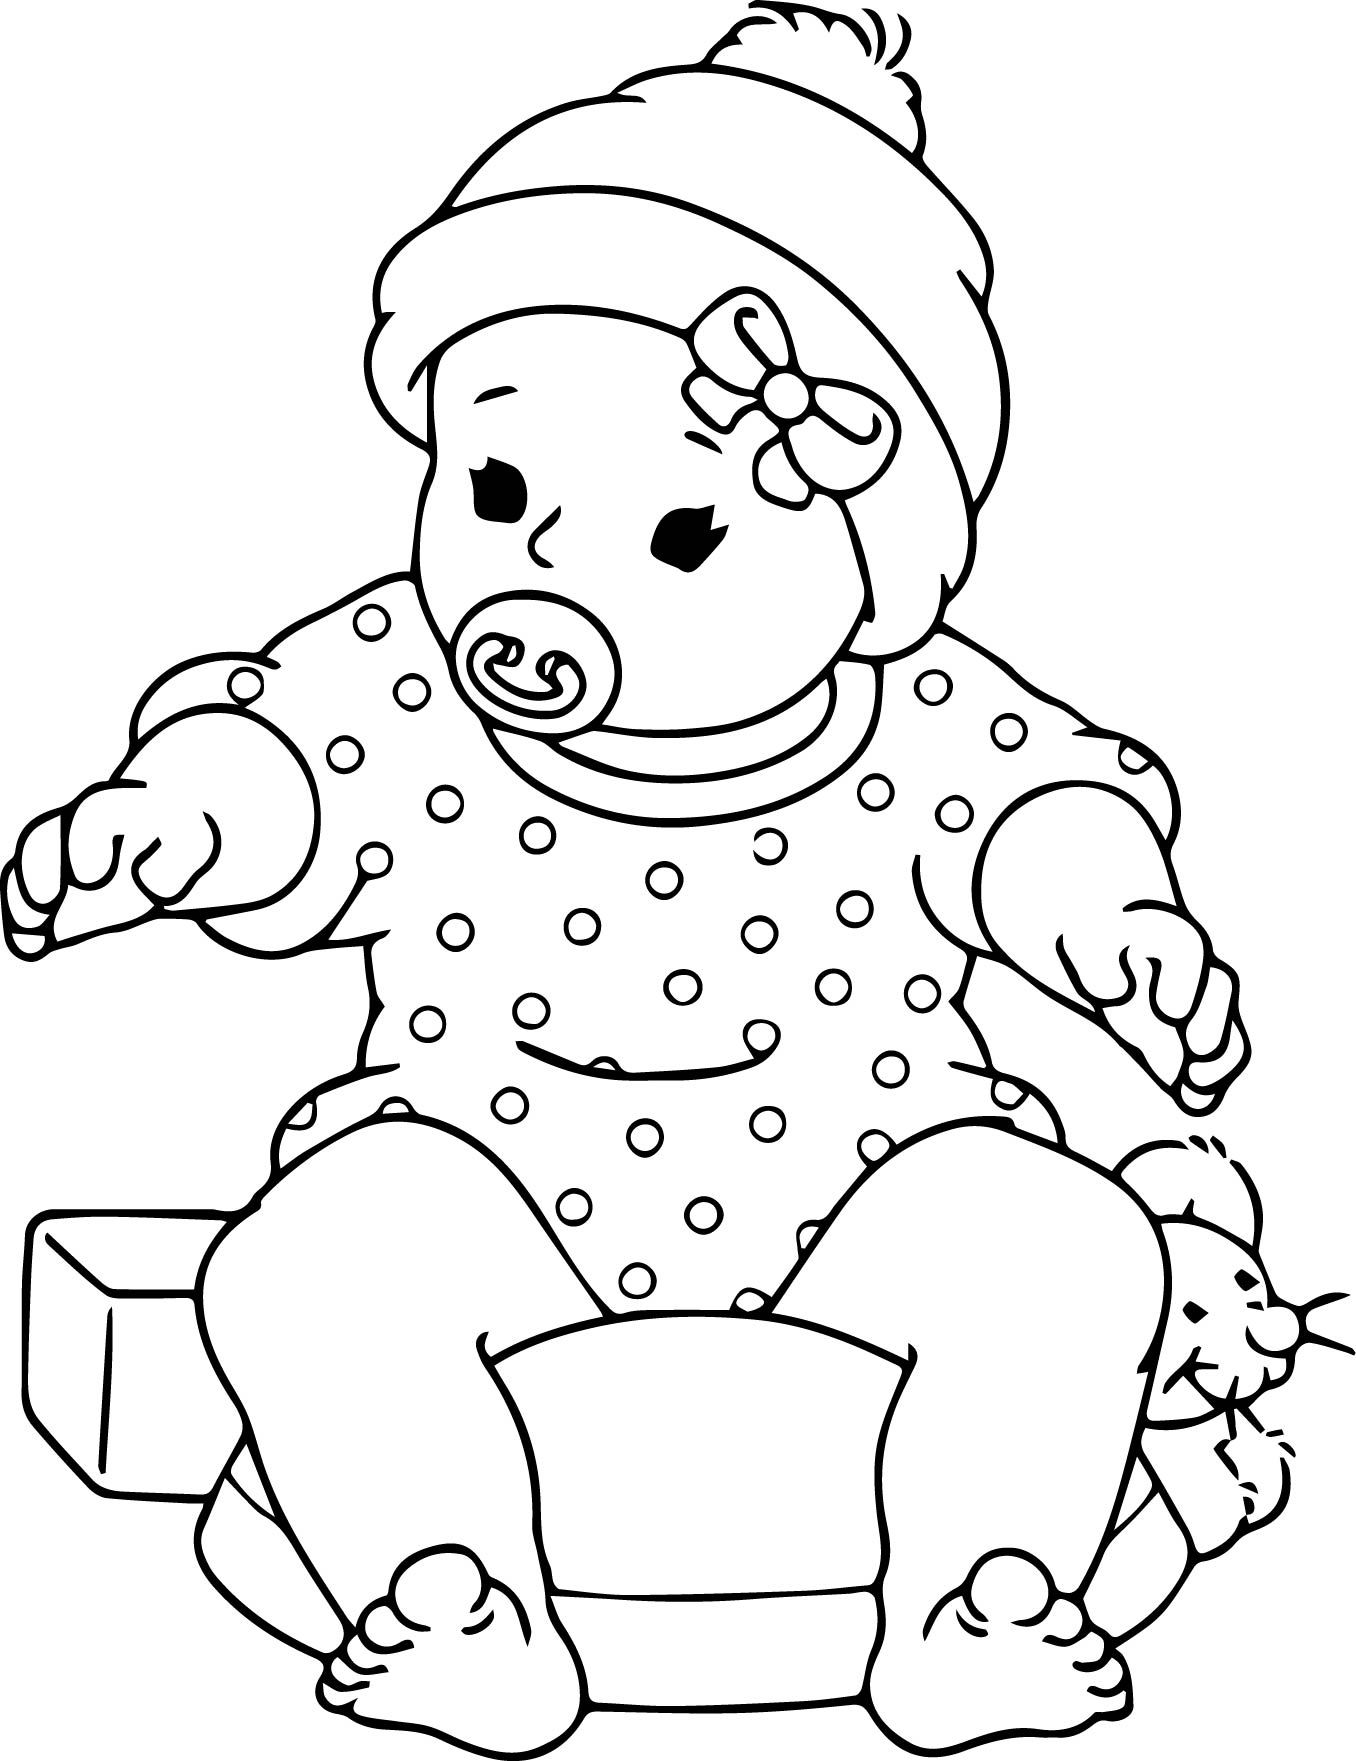 Free Printable Baby Doll Coloring Pages Throughout Inside | Baby ...